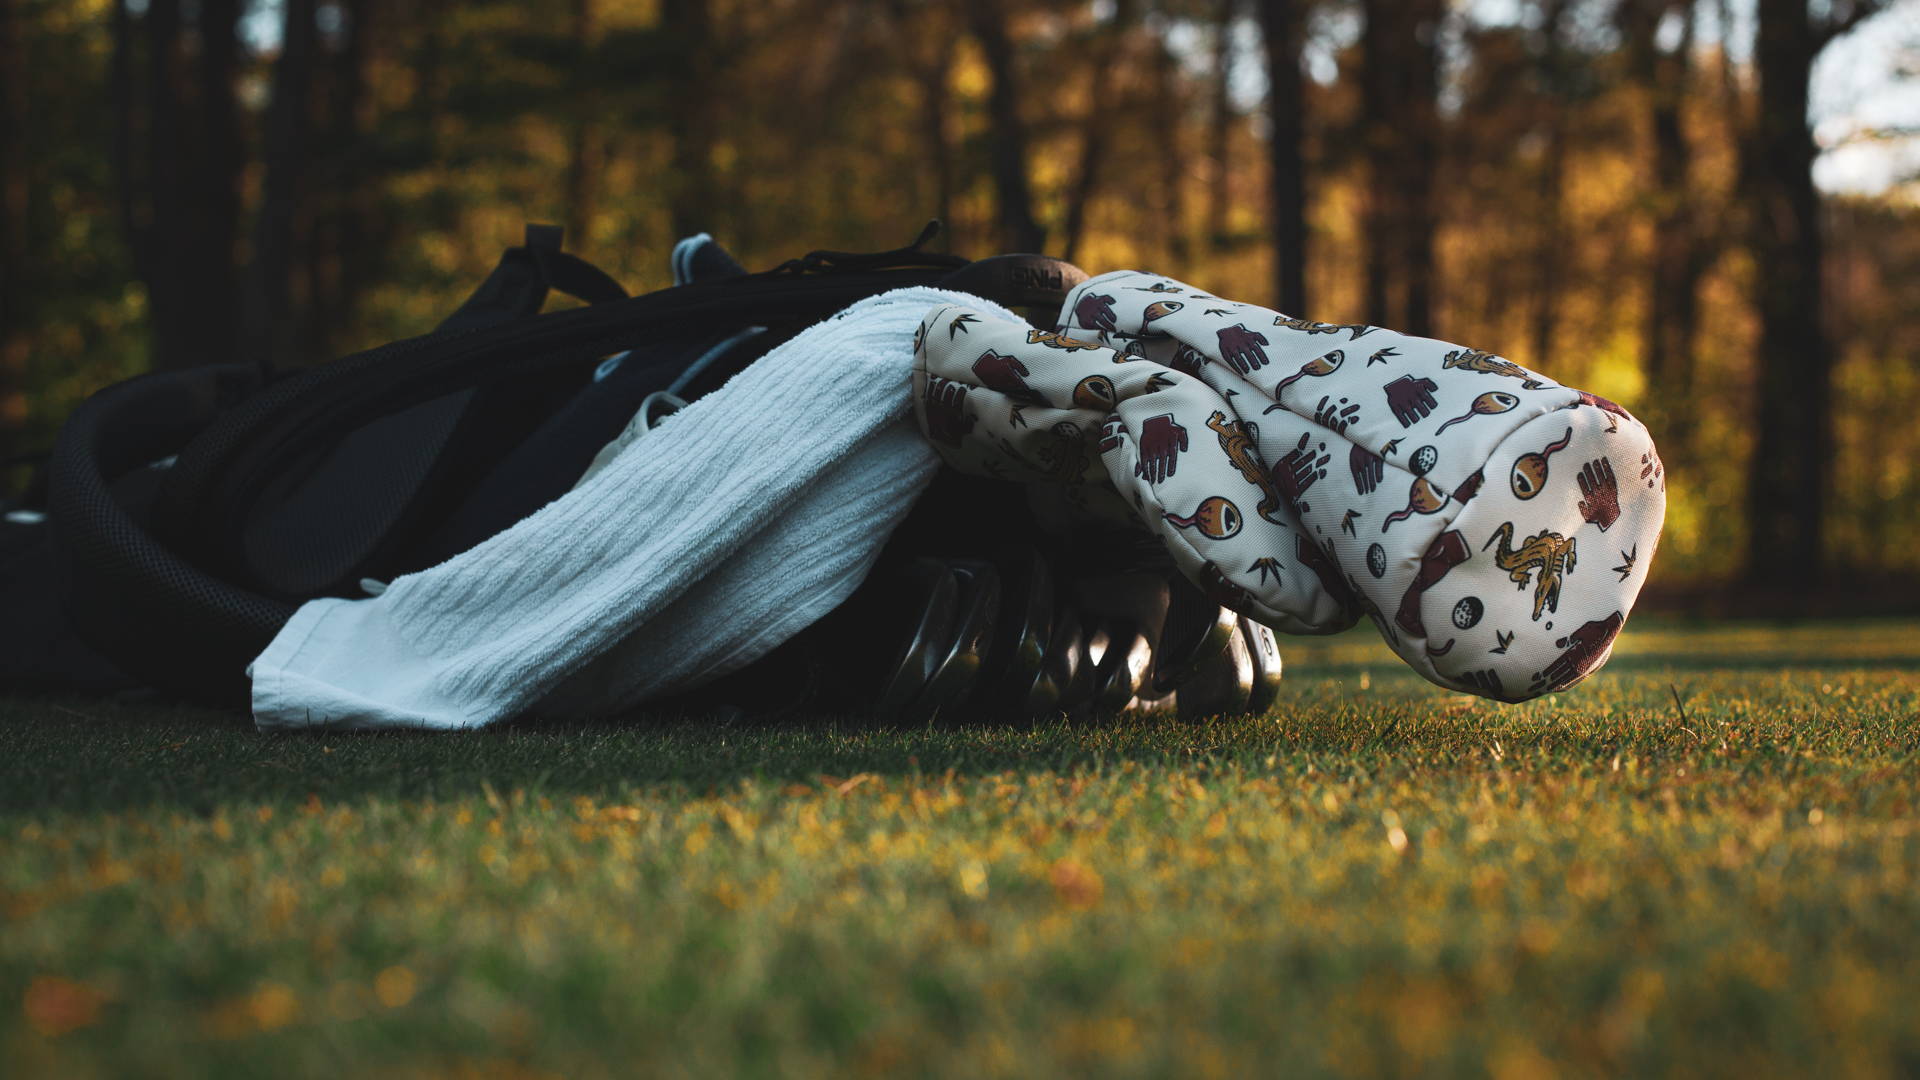 golf bag laying on the ground with Chubbs themed head covers from Cayce Golf